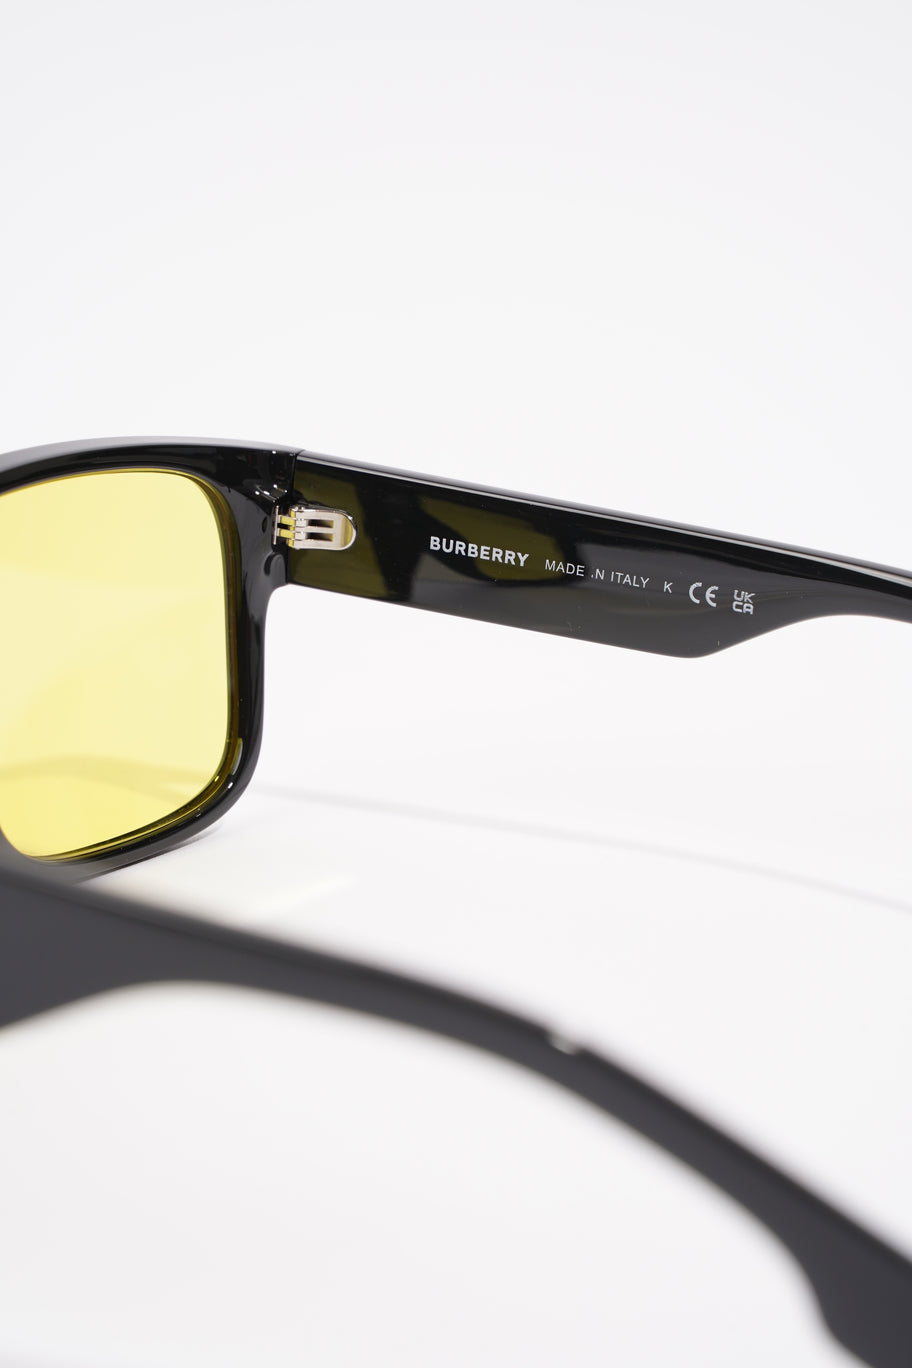 Knight Square Tinted Sunglasses Black / Yellow Acetate 145mm Image 8